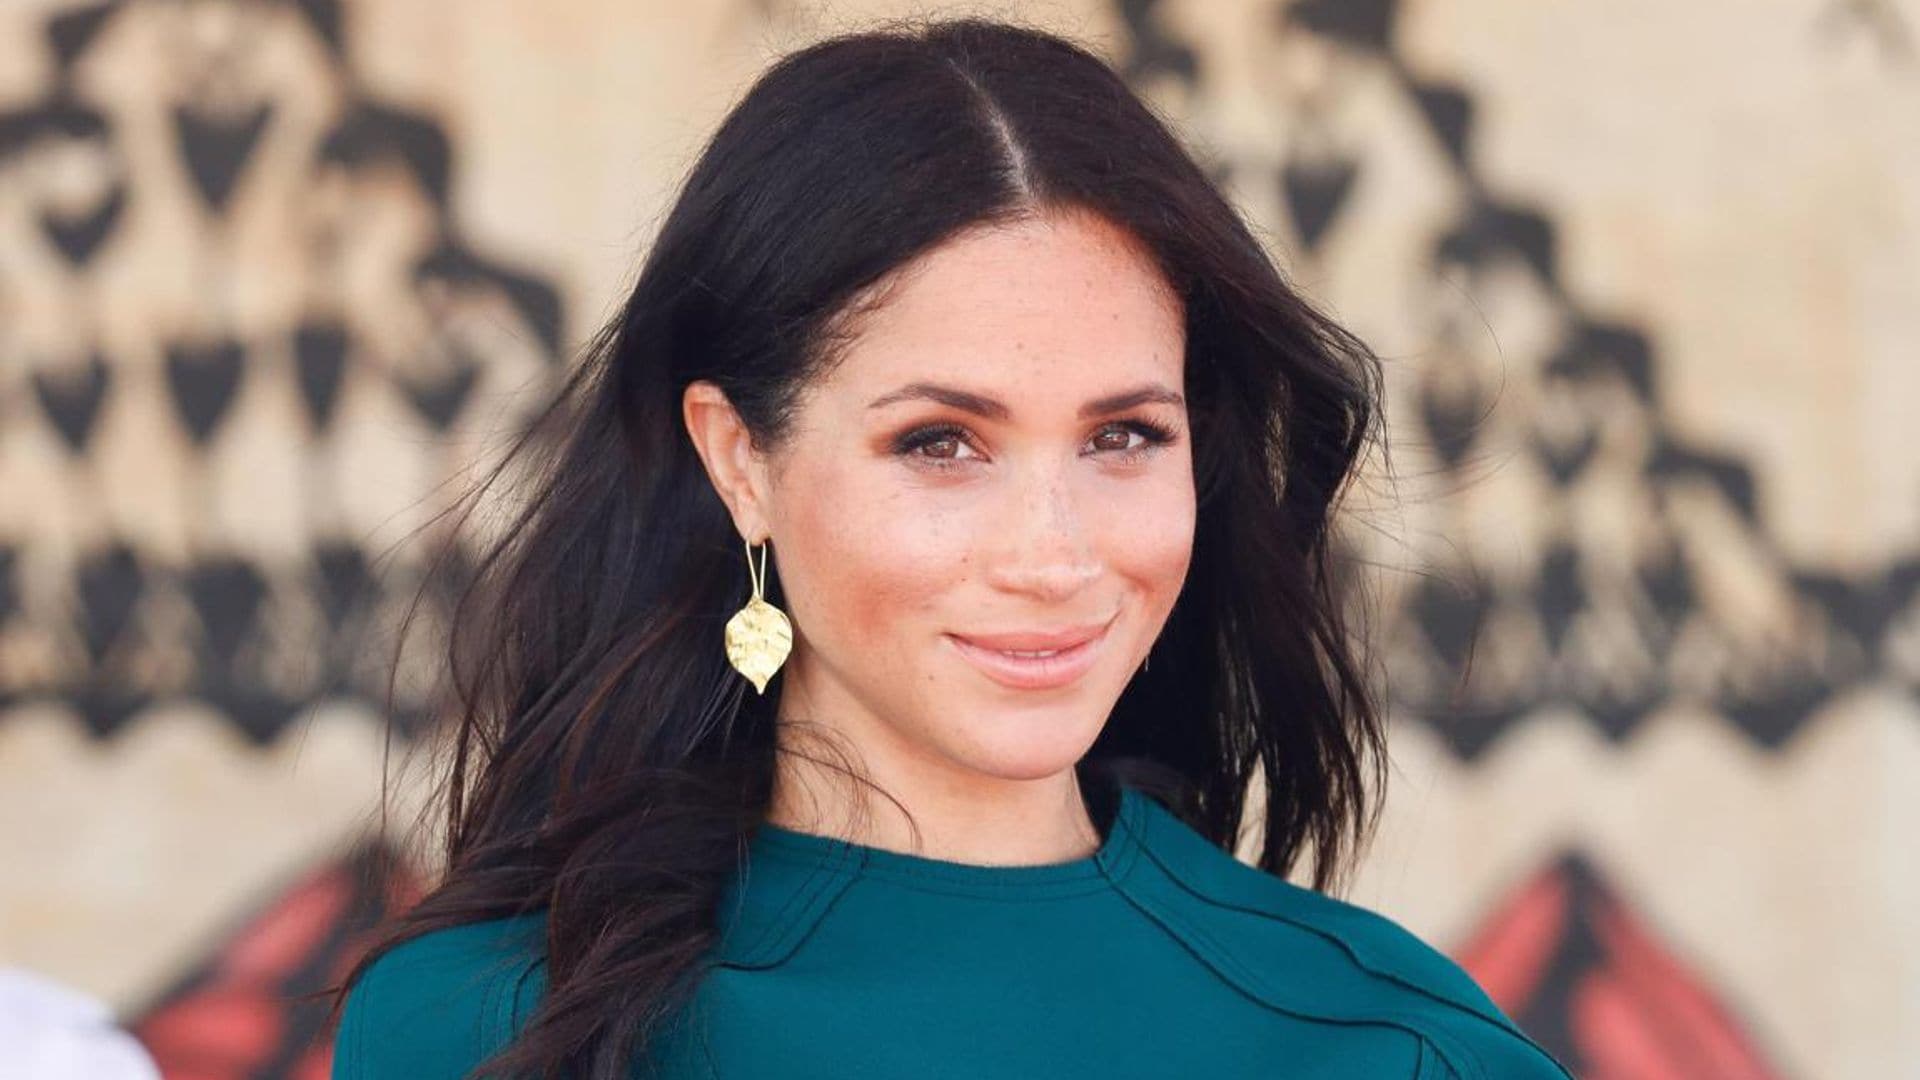 See Meghan Markle’s most spectacular jewelry moments as senior member of the Royal Family